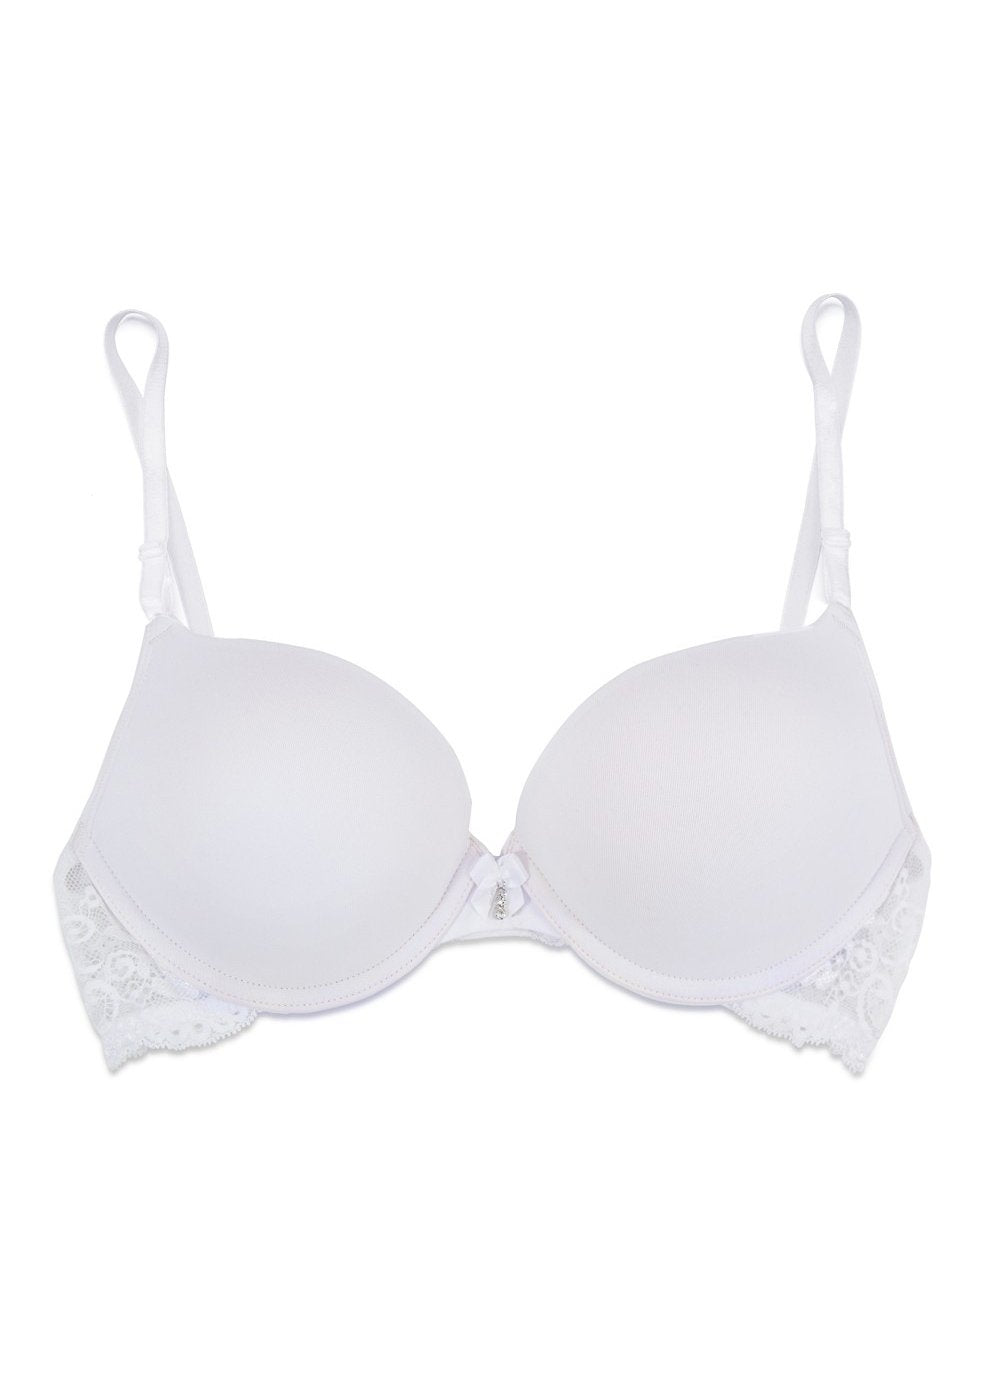 Add 2 Cup Sizes Push-Up Bra  White W Lace Wings – Smart & Sexy